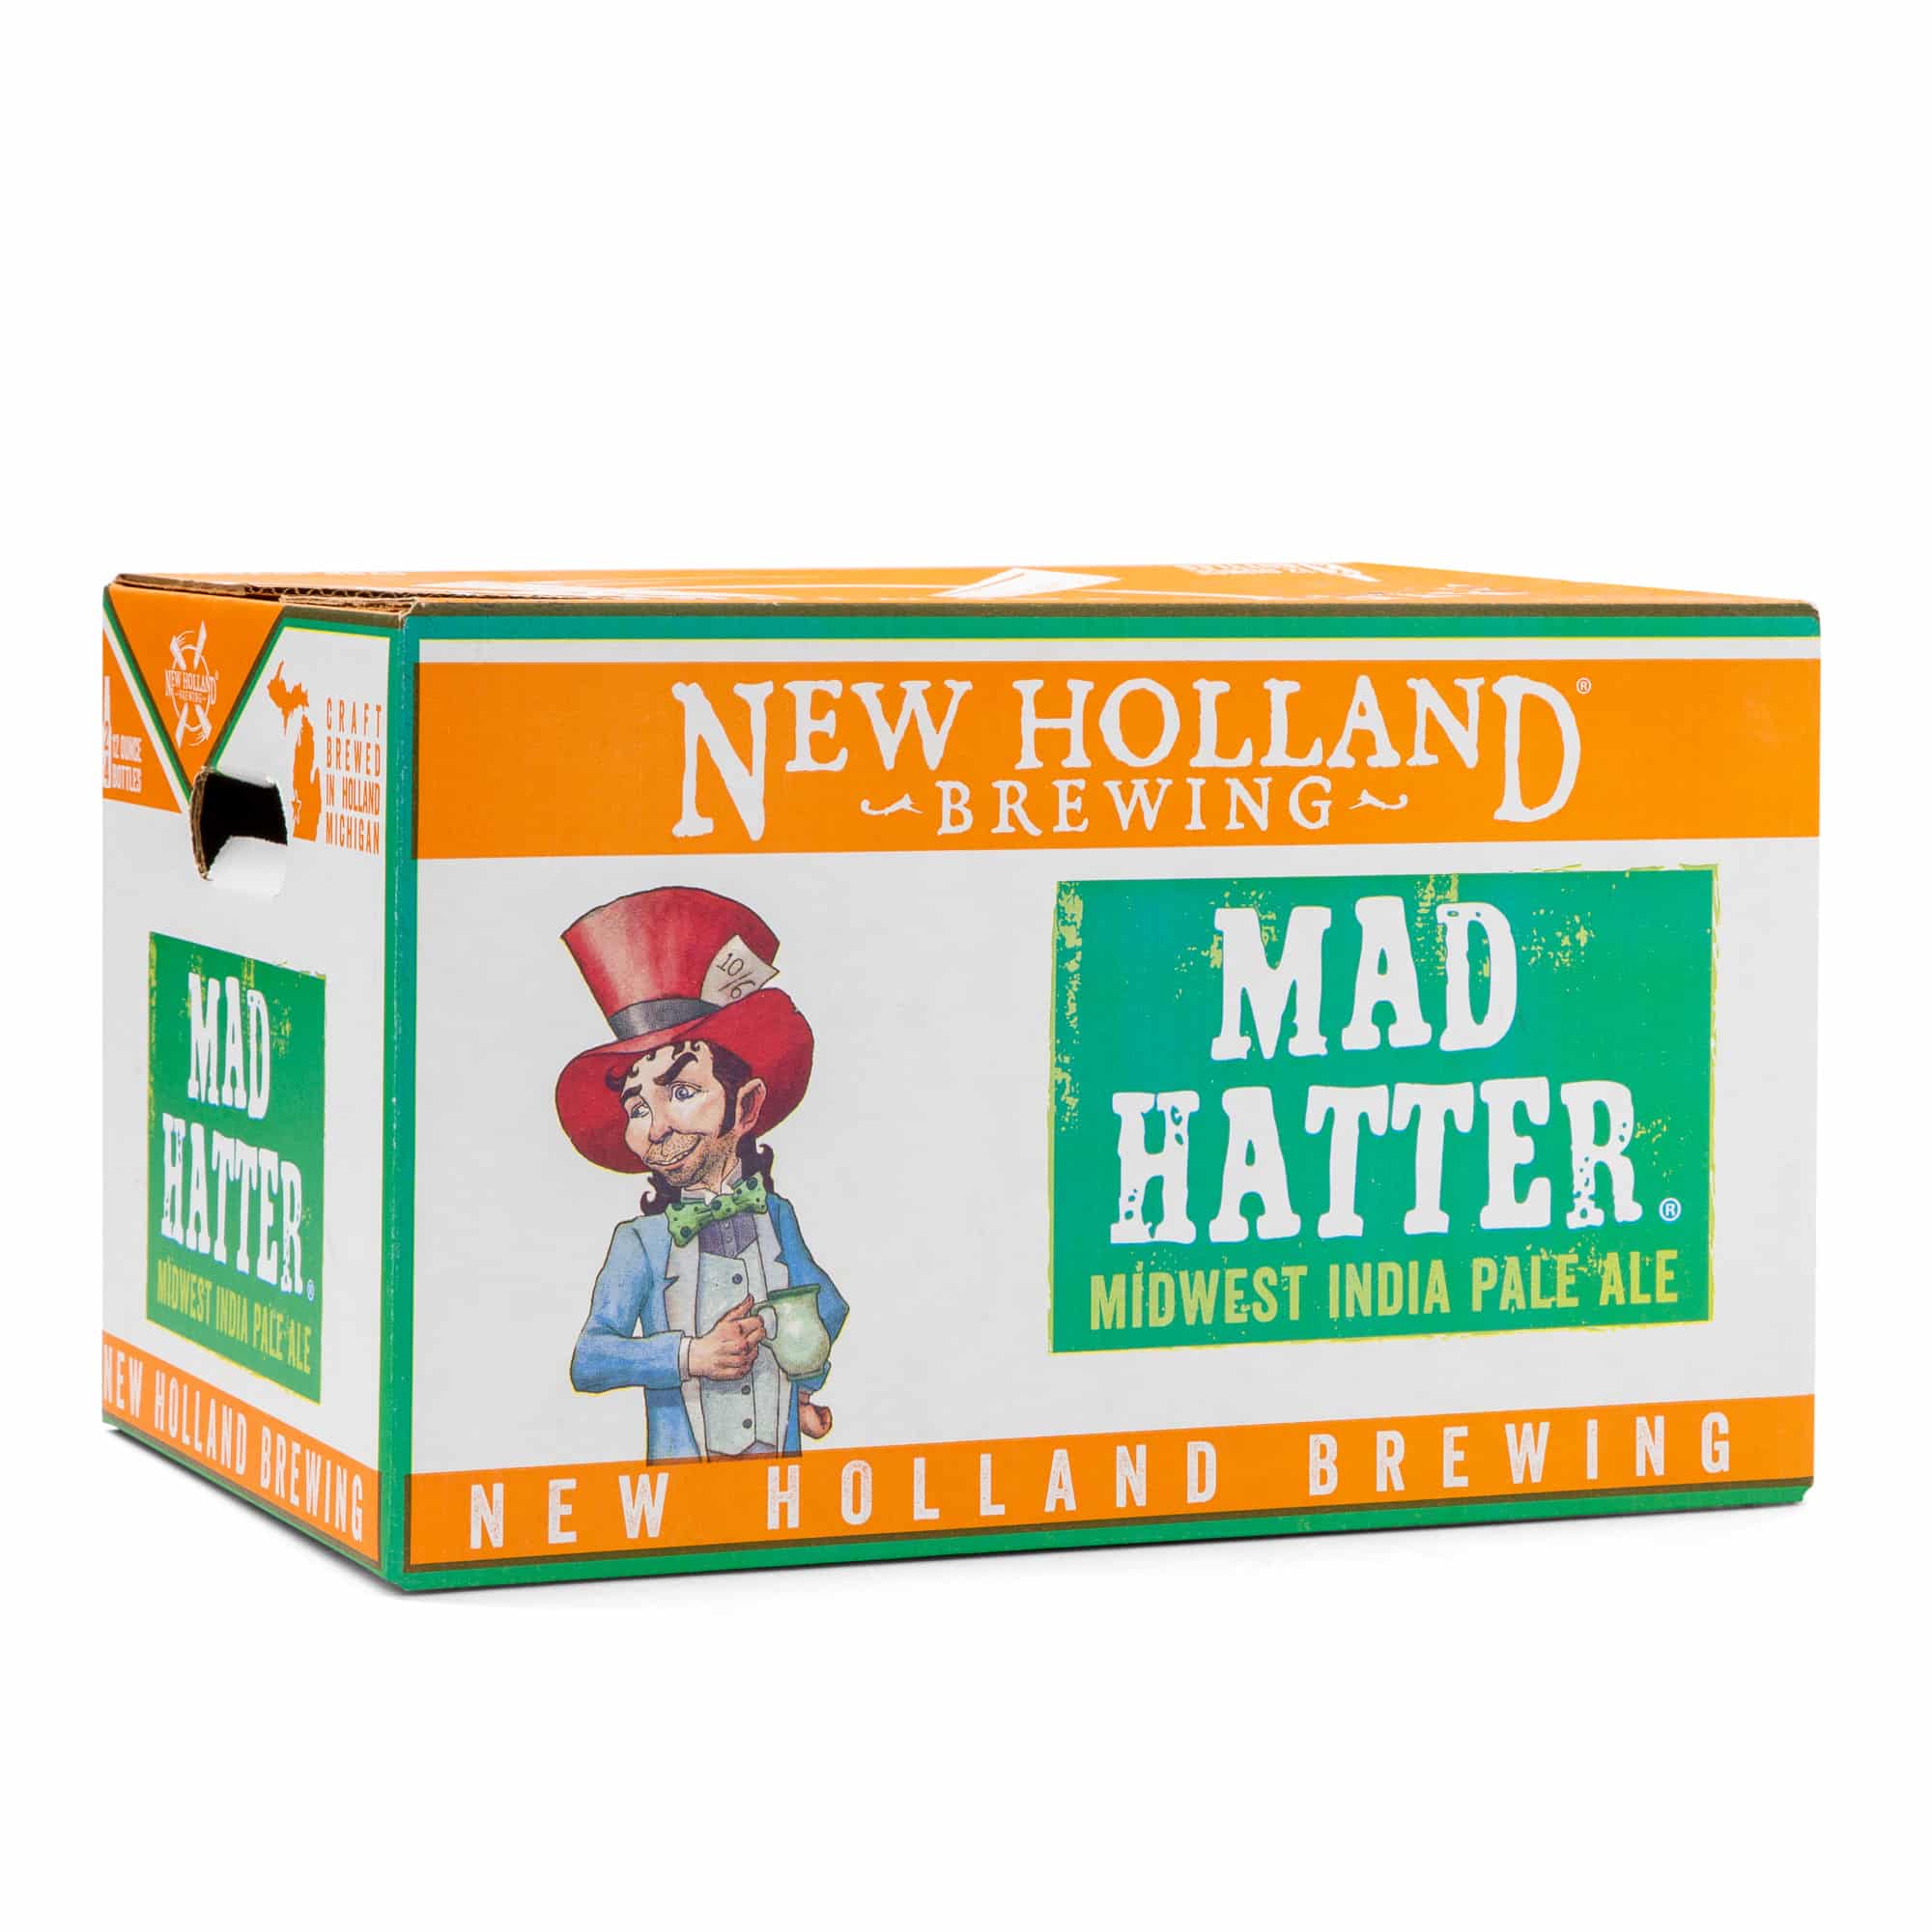 Image of New Holland Brewing's Mad Hatter Pale Ale box